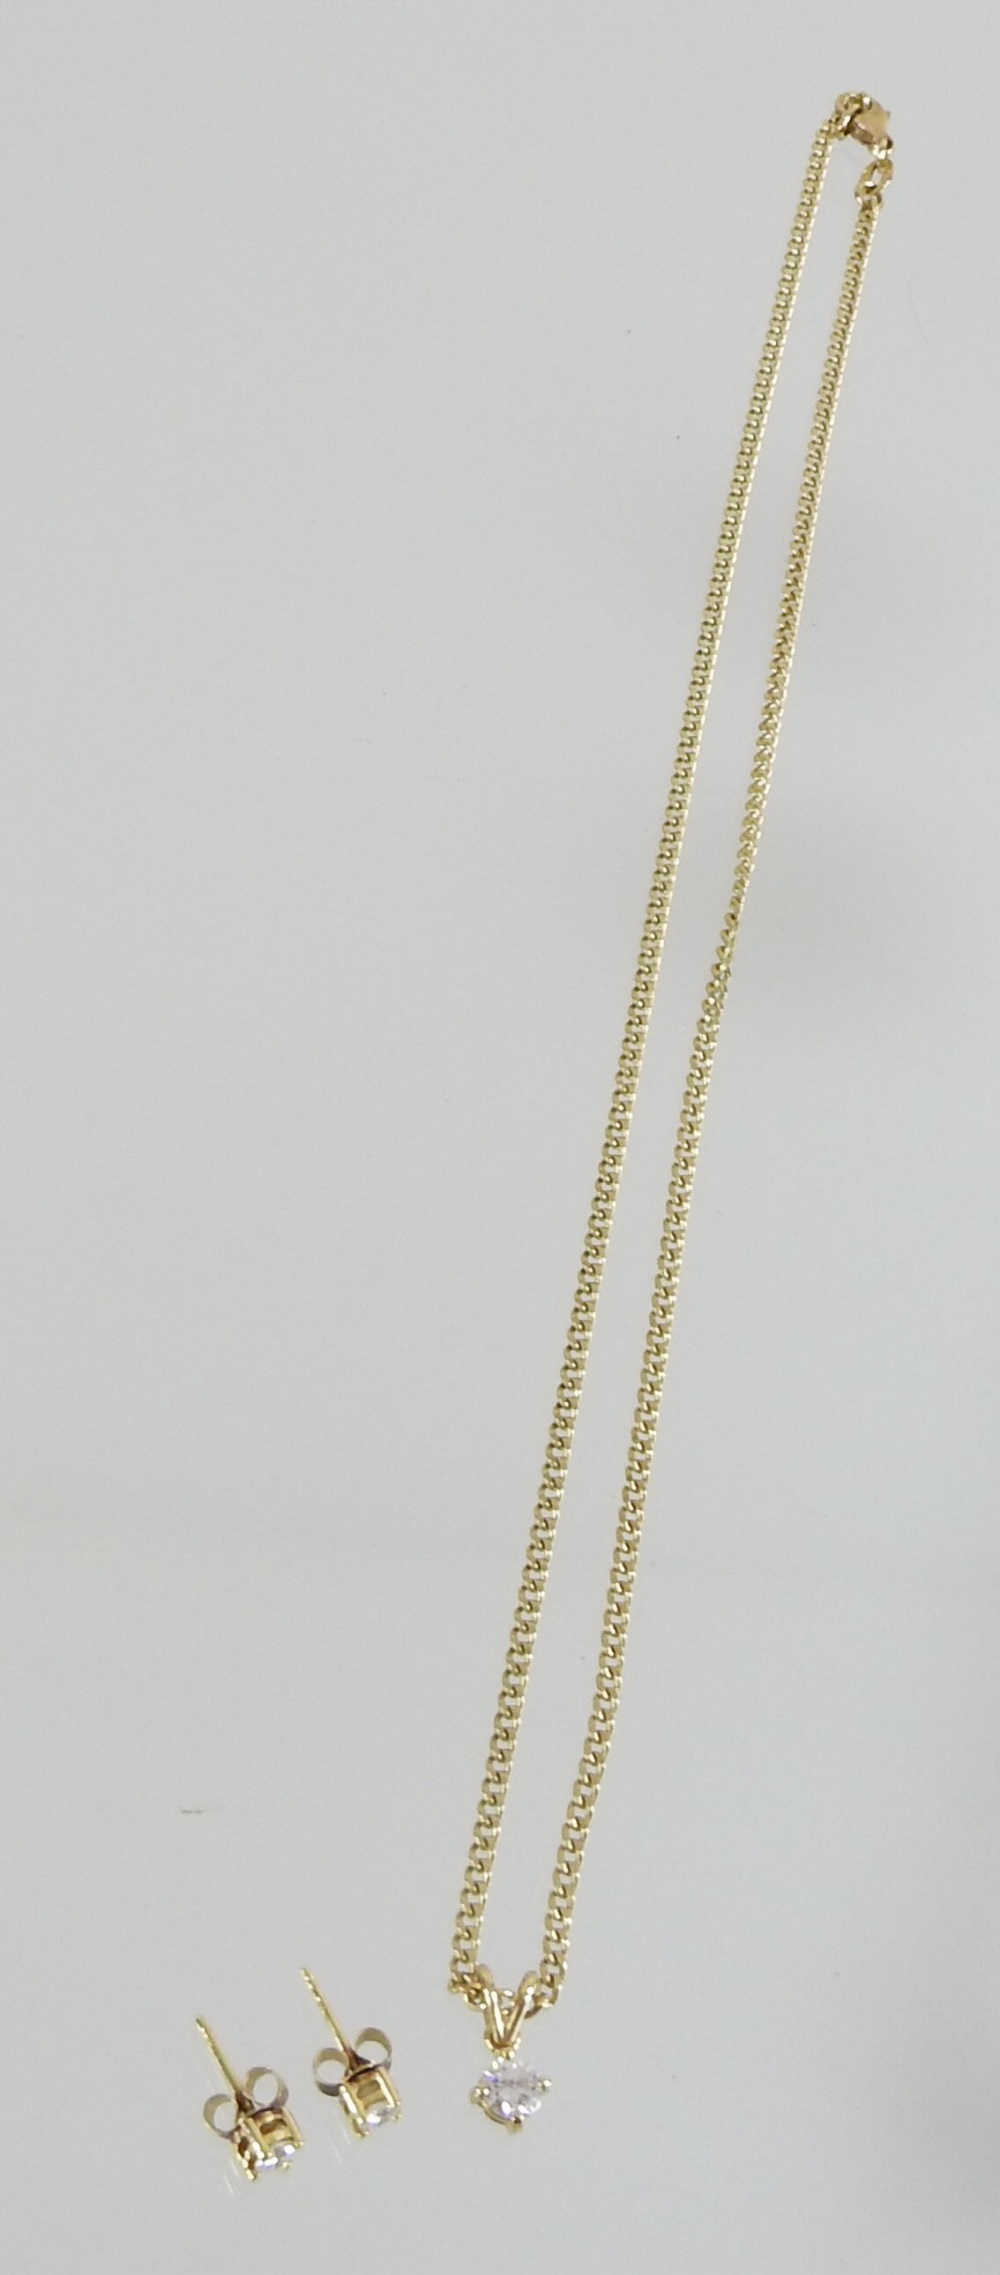 An 18 carat gold curb link necklace, with a single stone diamond pendant, 20cm, - Image 5 of 6